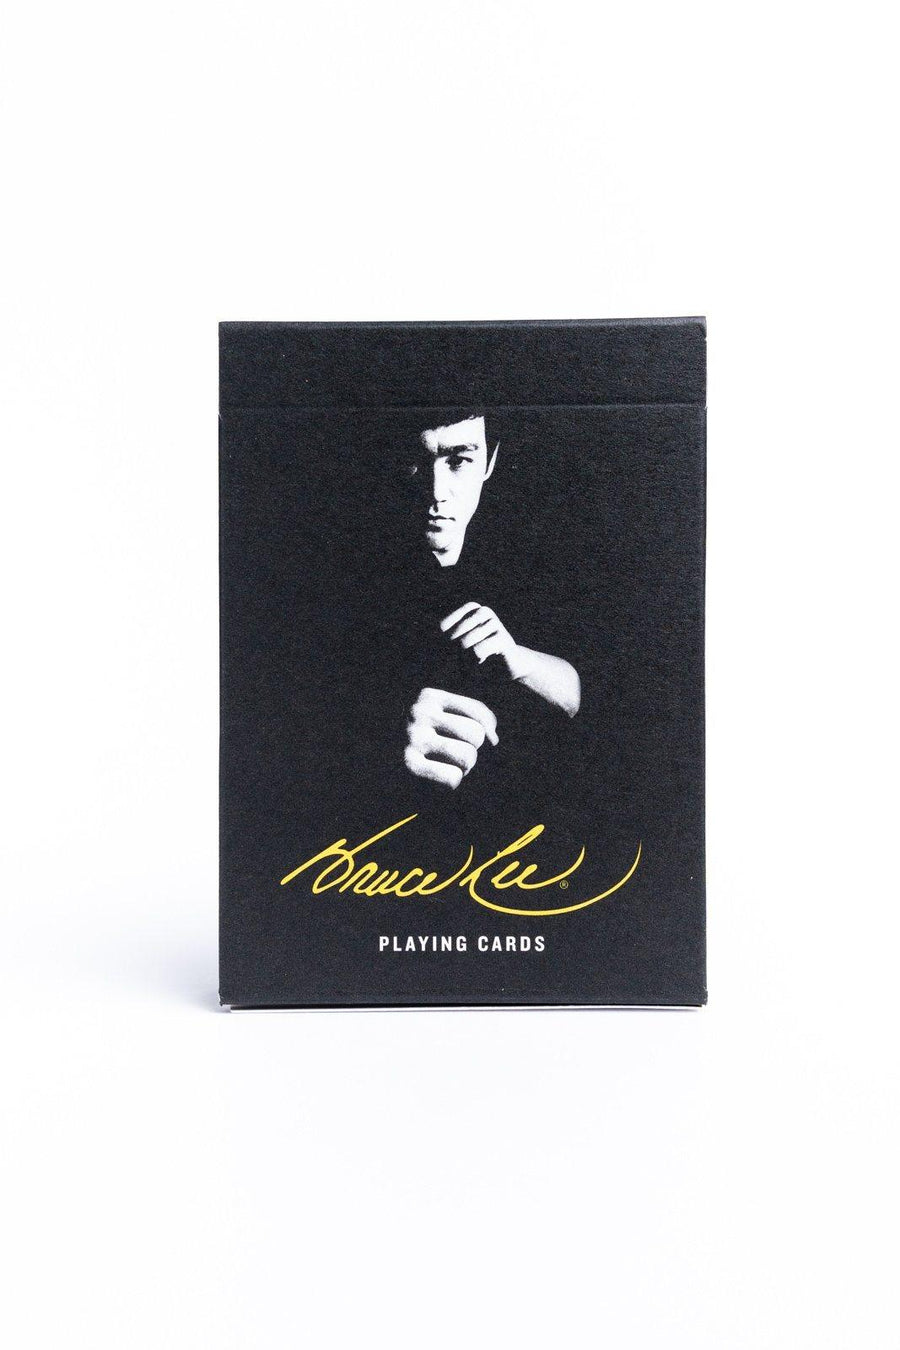 Official Bruce Lee Playing Cards Playing Cards by Art of Play